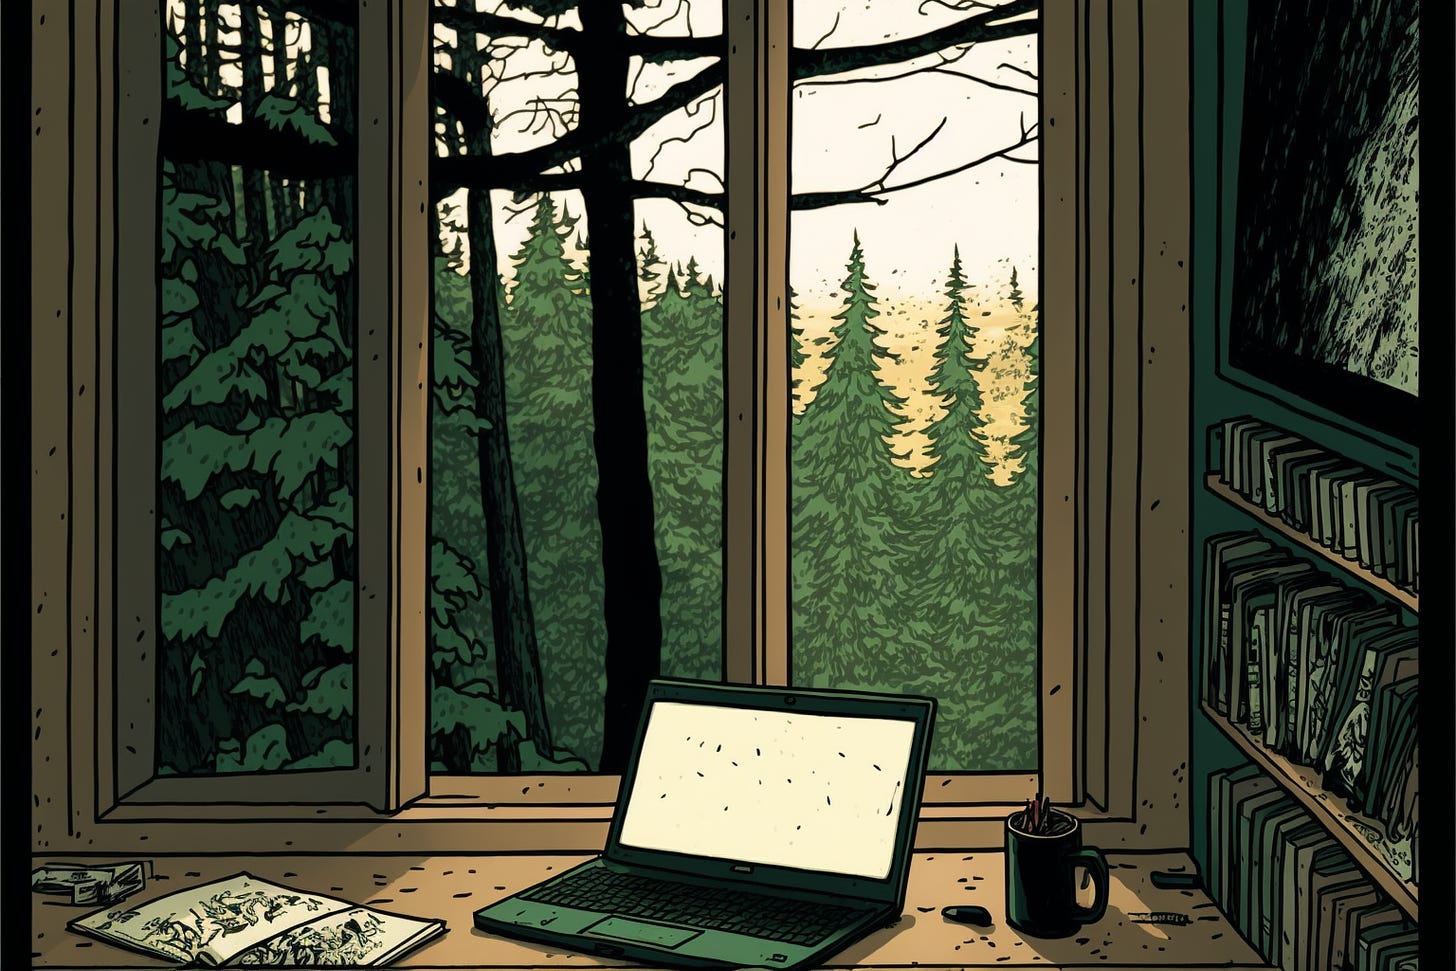 a laptop in front of a window looking out at a forest scene, graphic novel